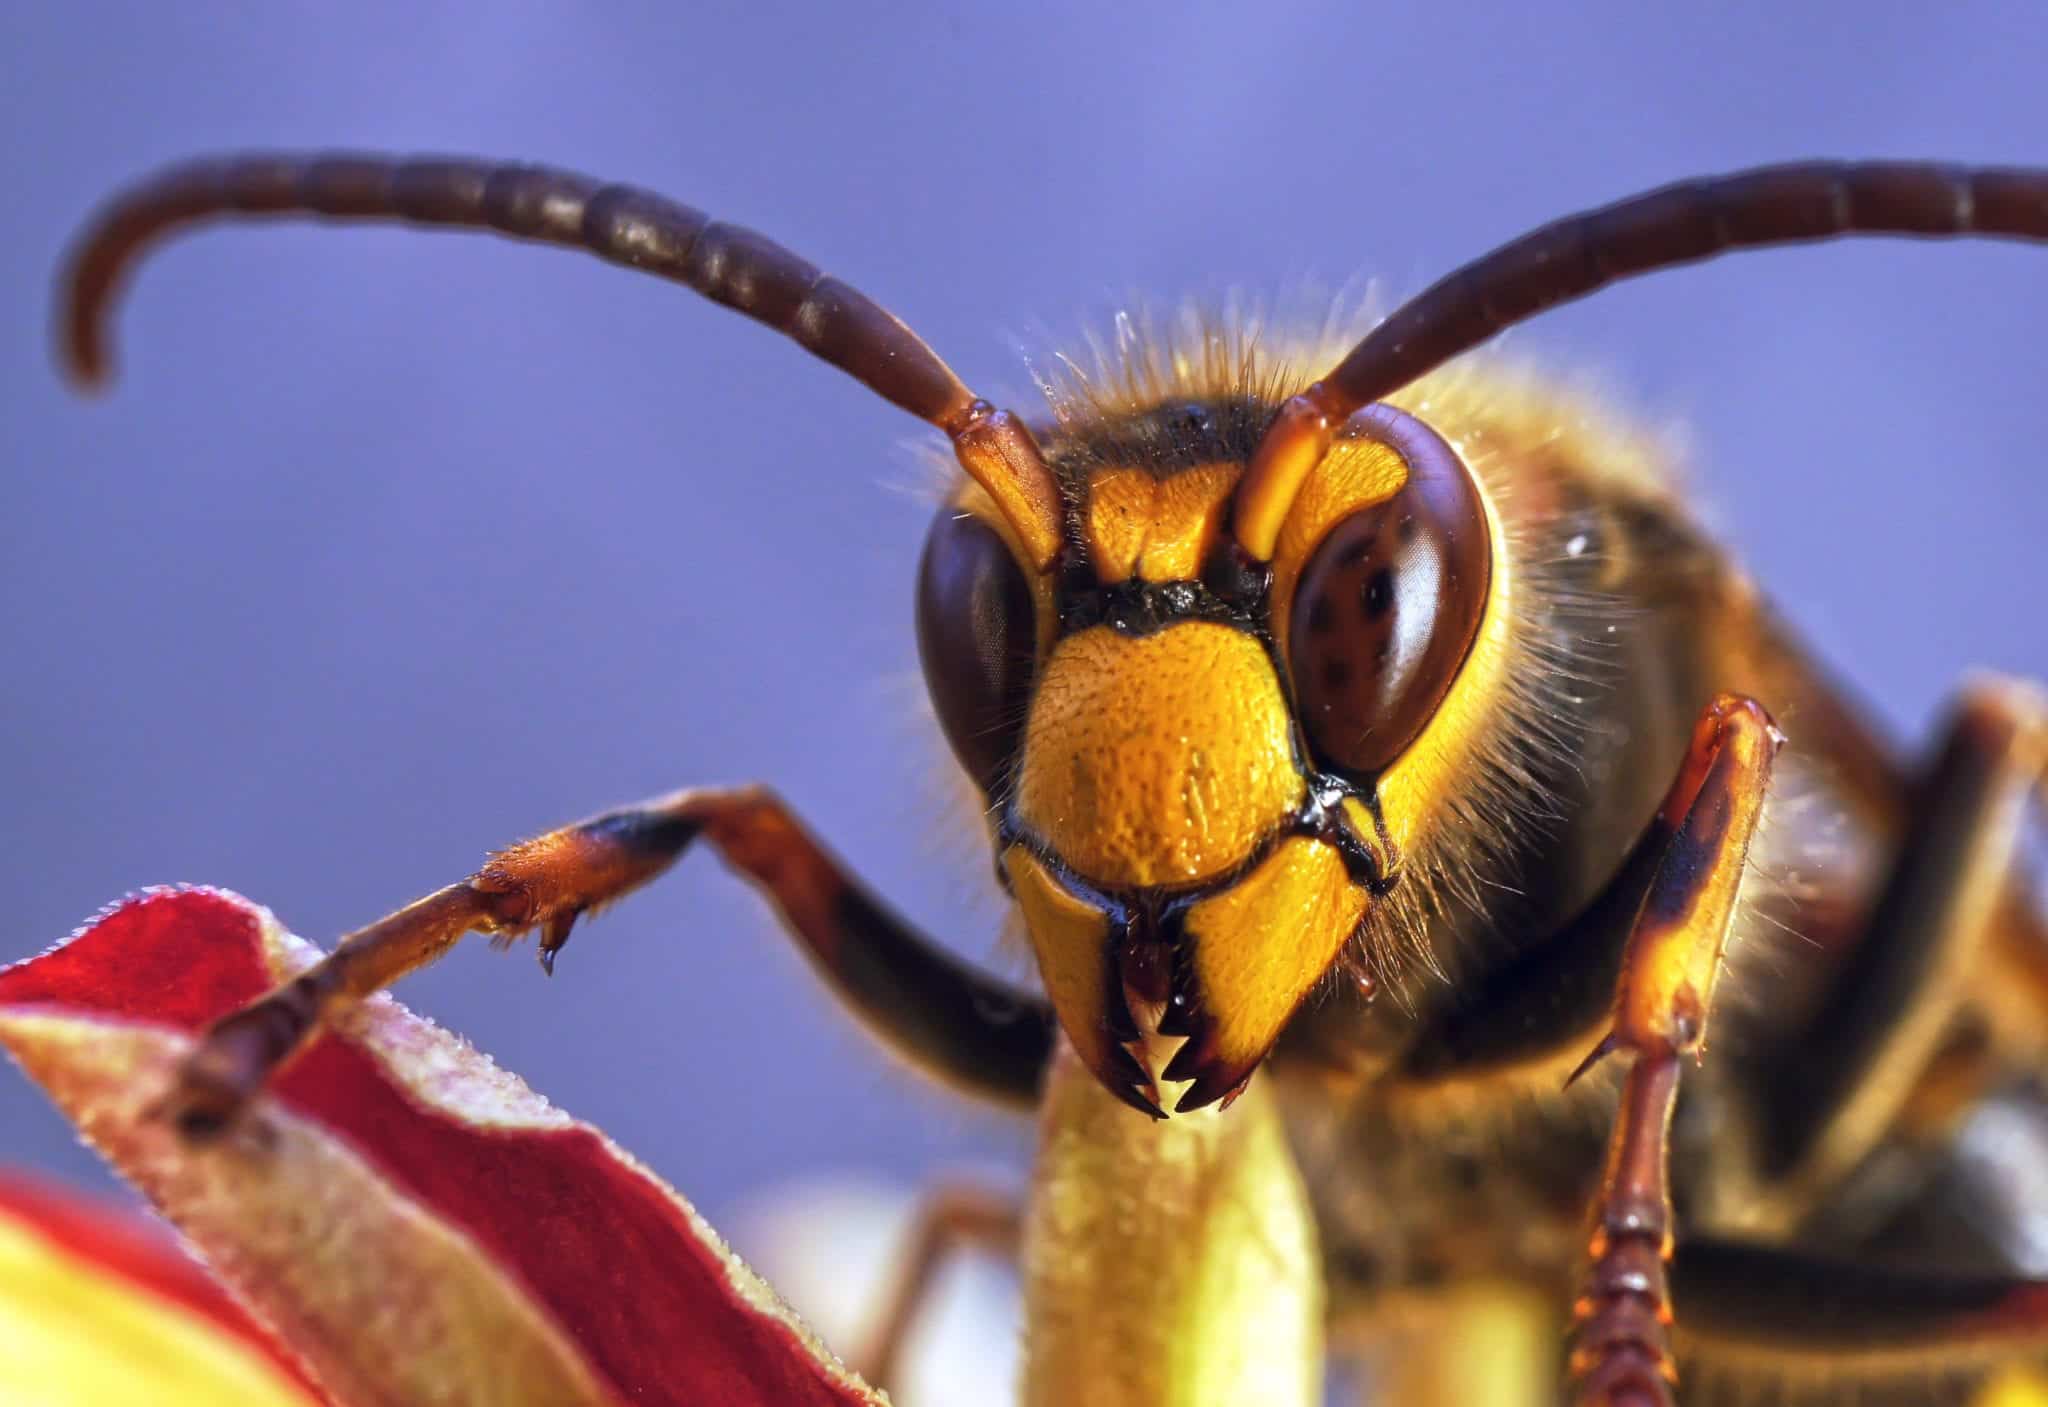 5 Of The Most Aggressive Wasps Pointe Pest Control Chicago Pest Control And Exterminator